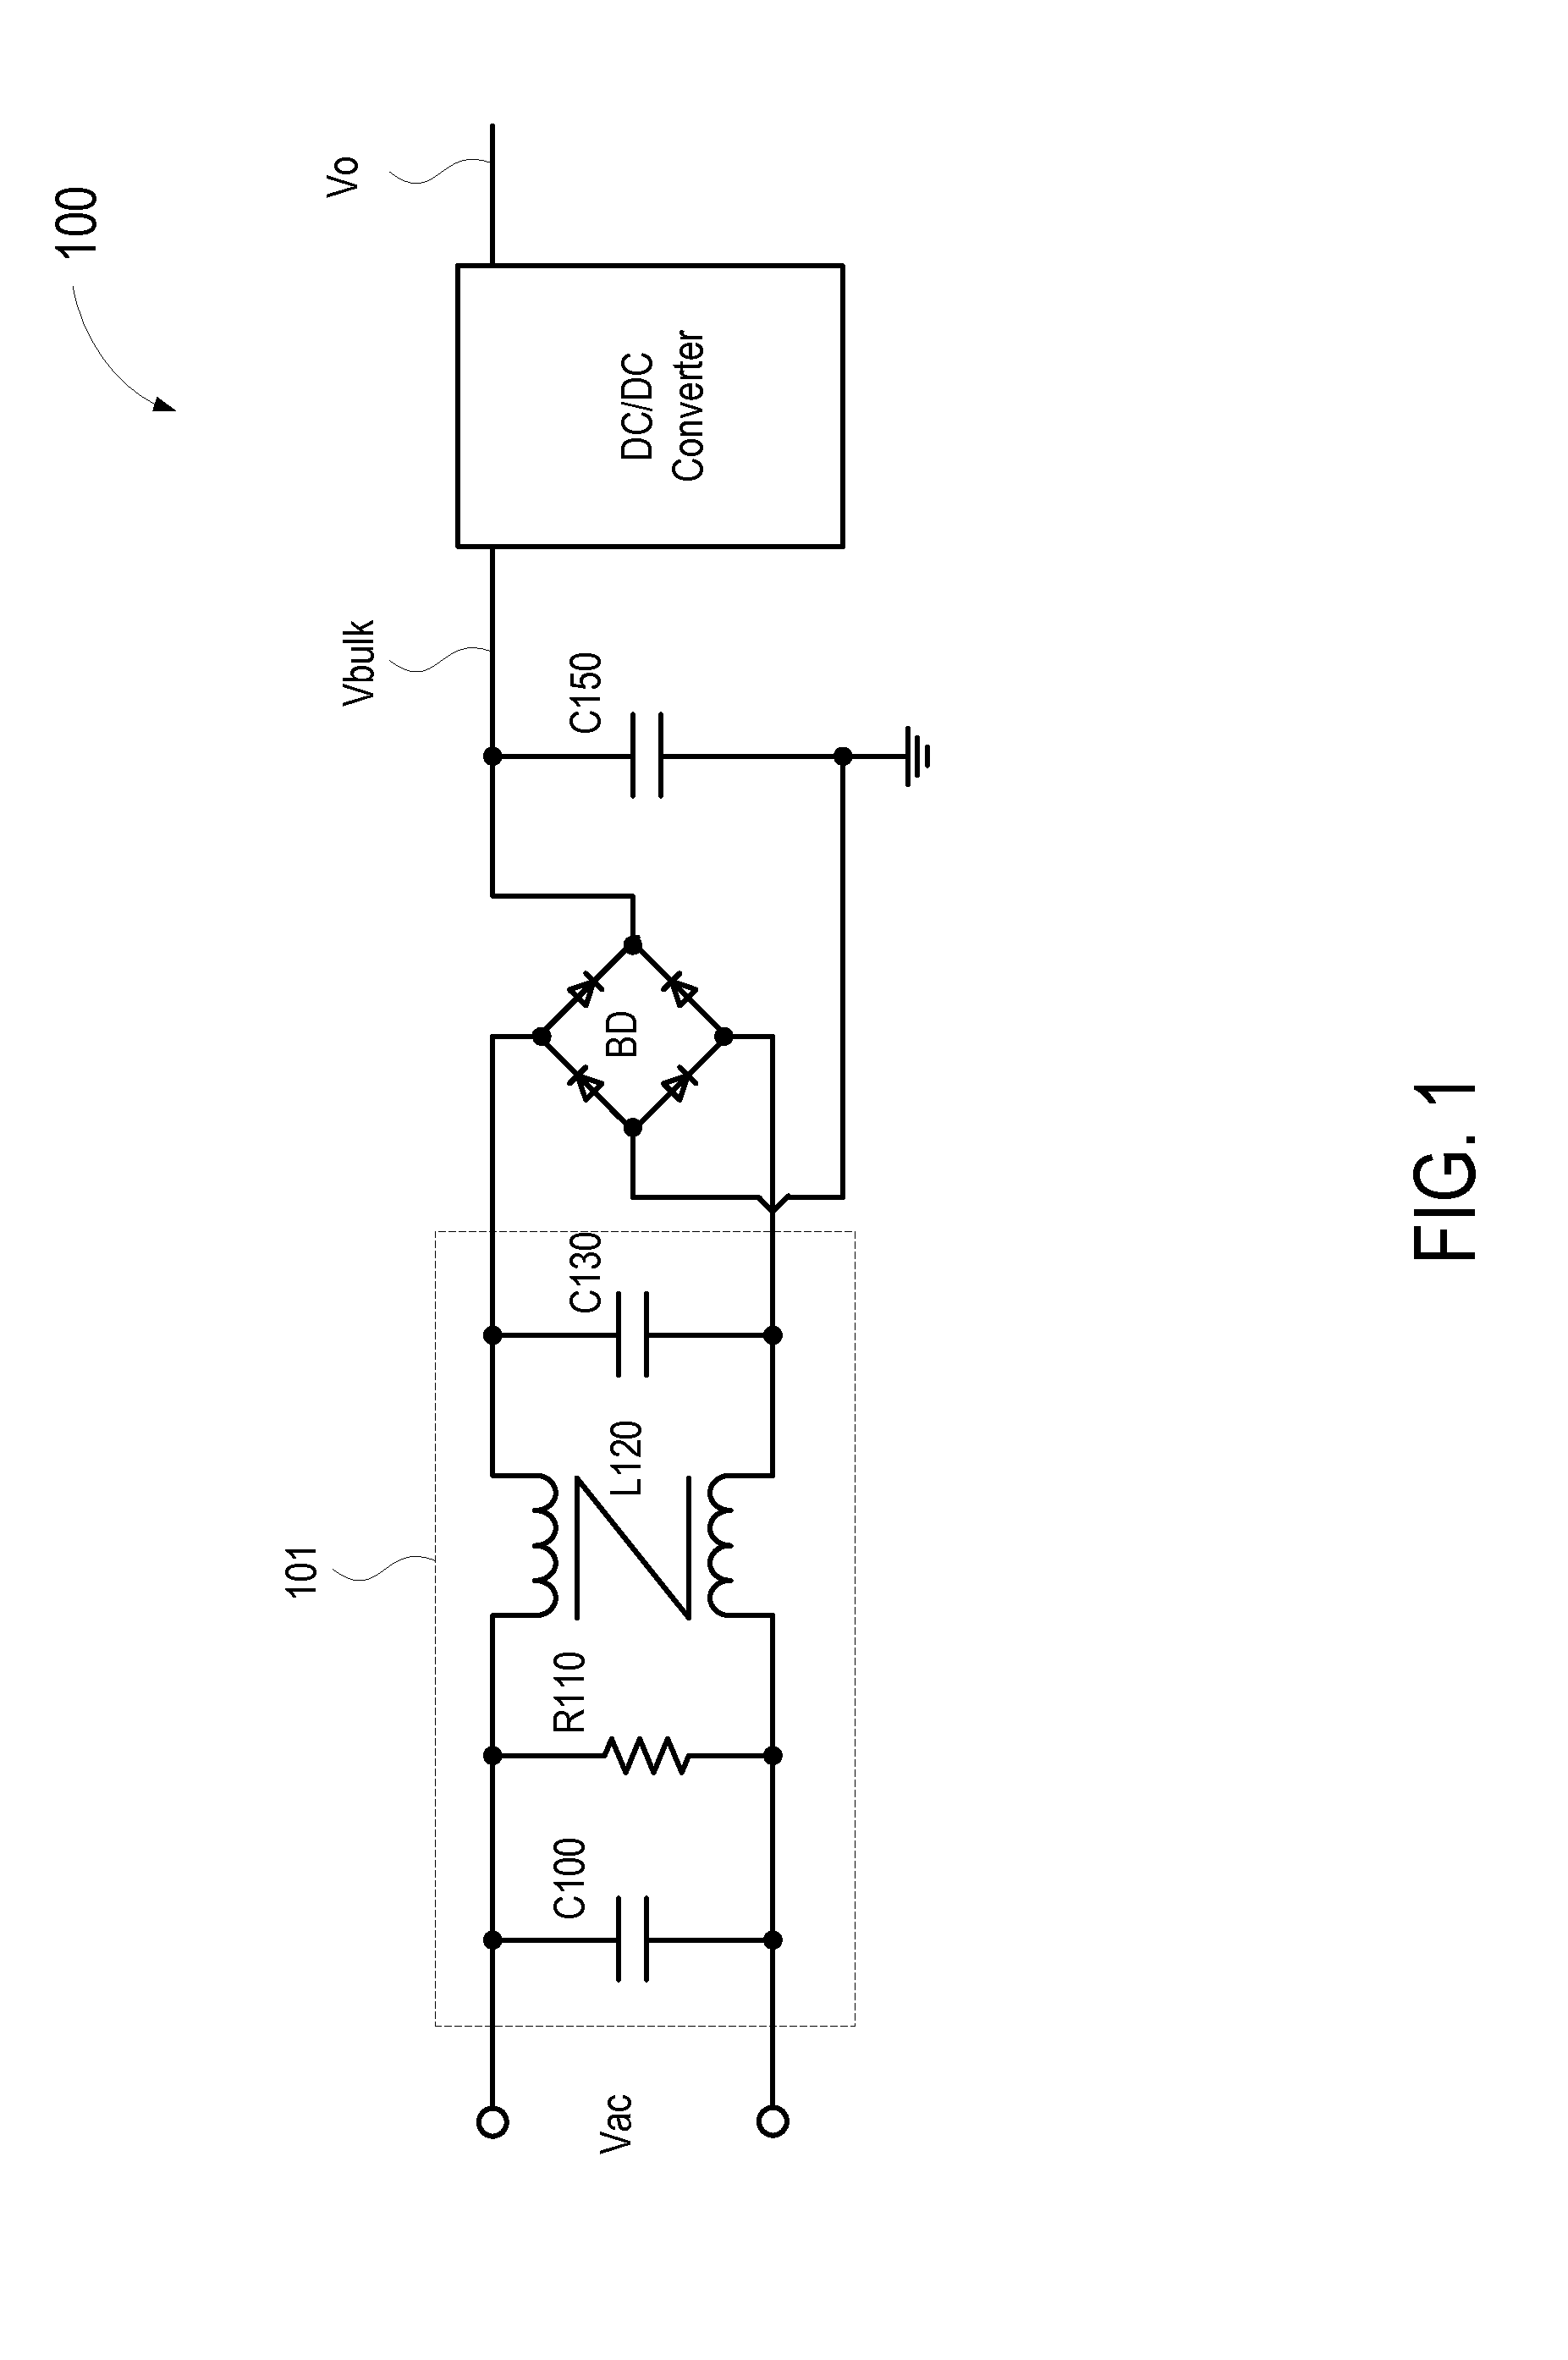 Capacitor discharge circuit for power supply EMI filters